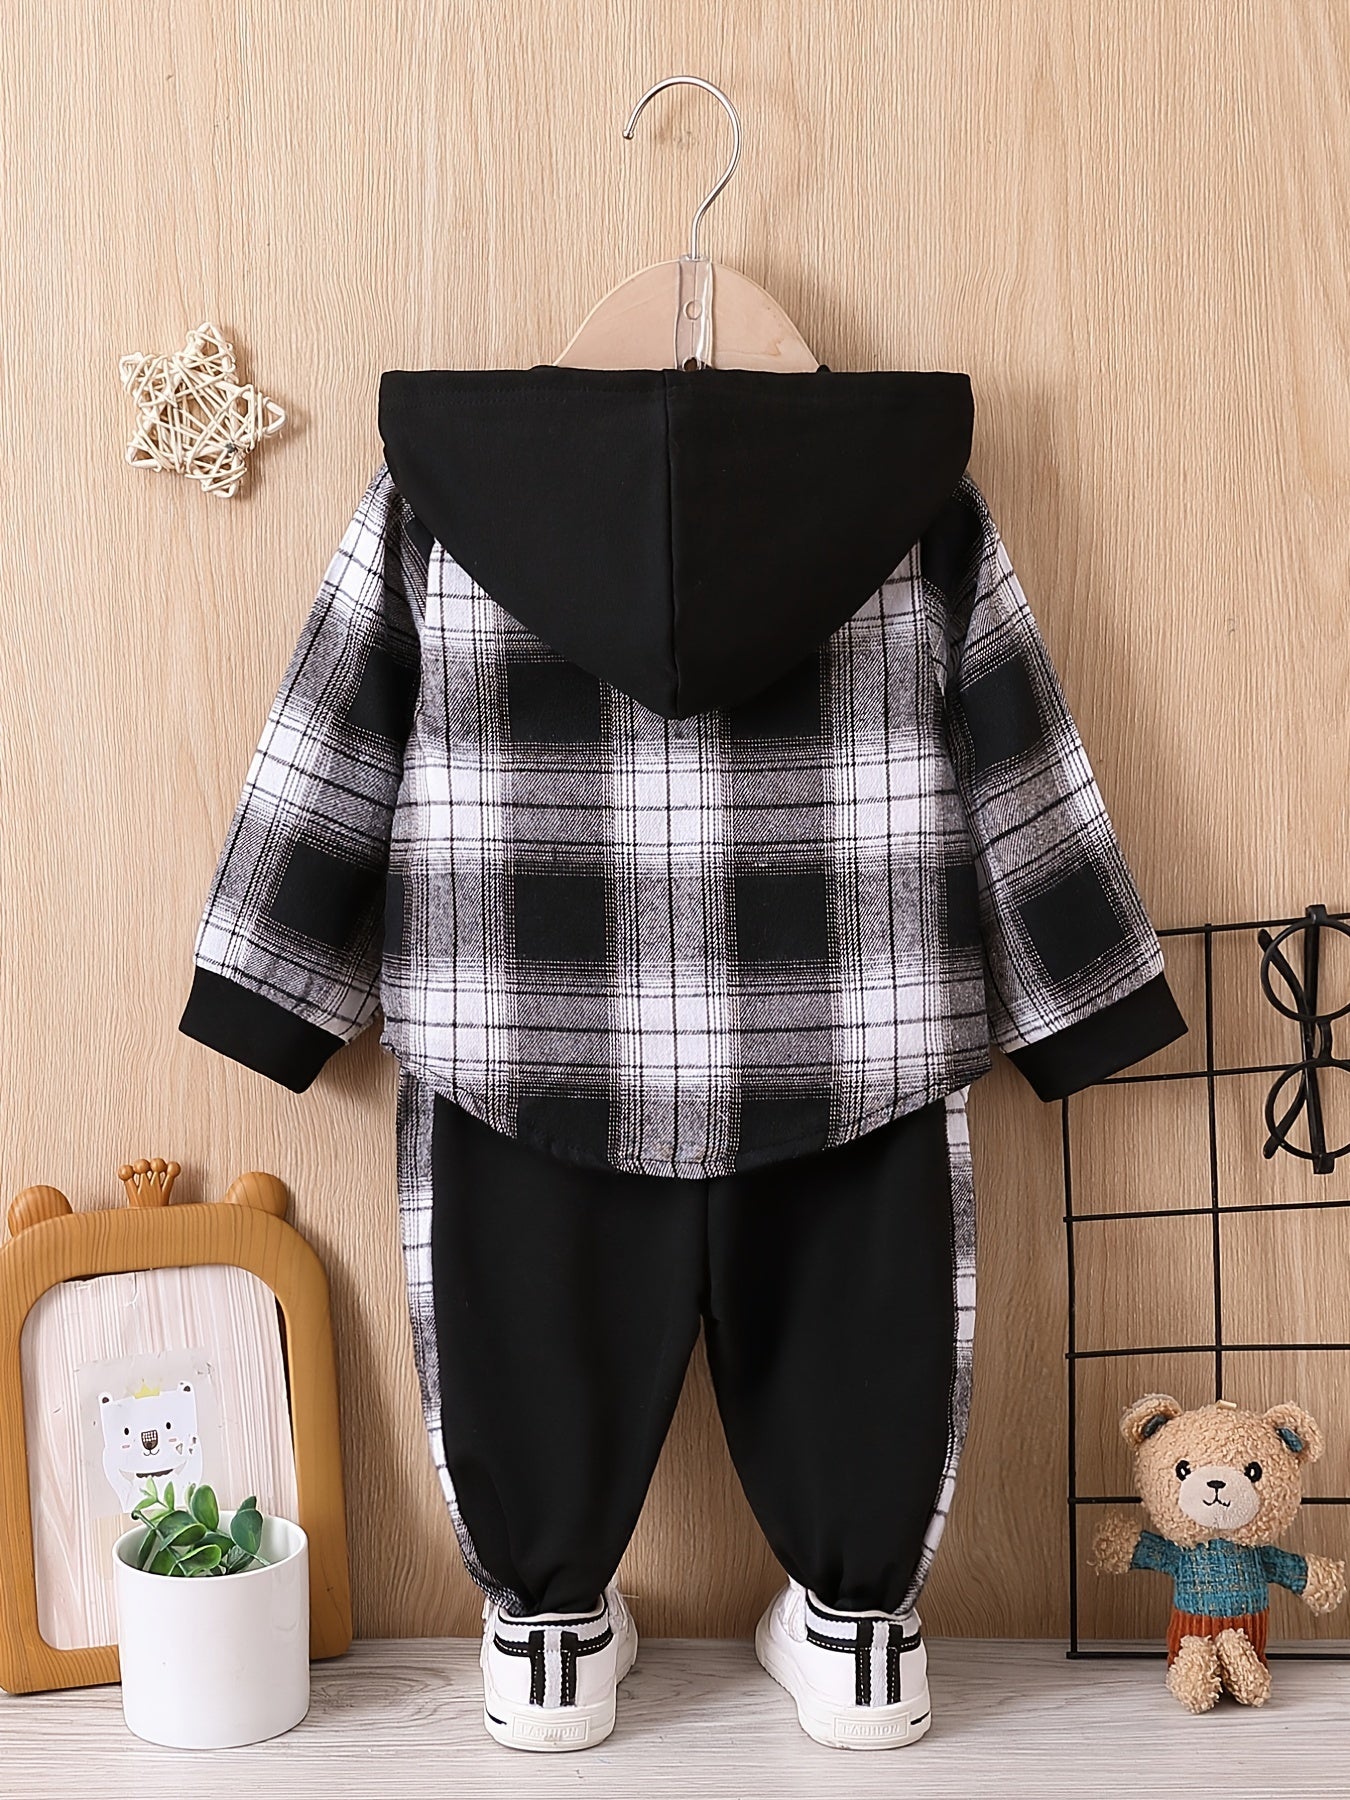 Baby Boys Stylish Outfit - Hooded Black And White Plaid Shirt & Contrast Color Stitching Trousers Set Your Handsome Kids!